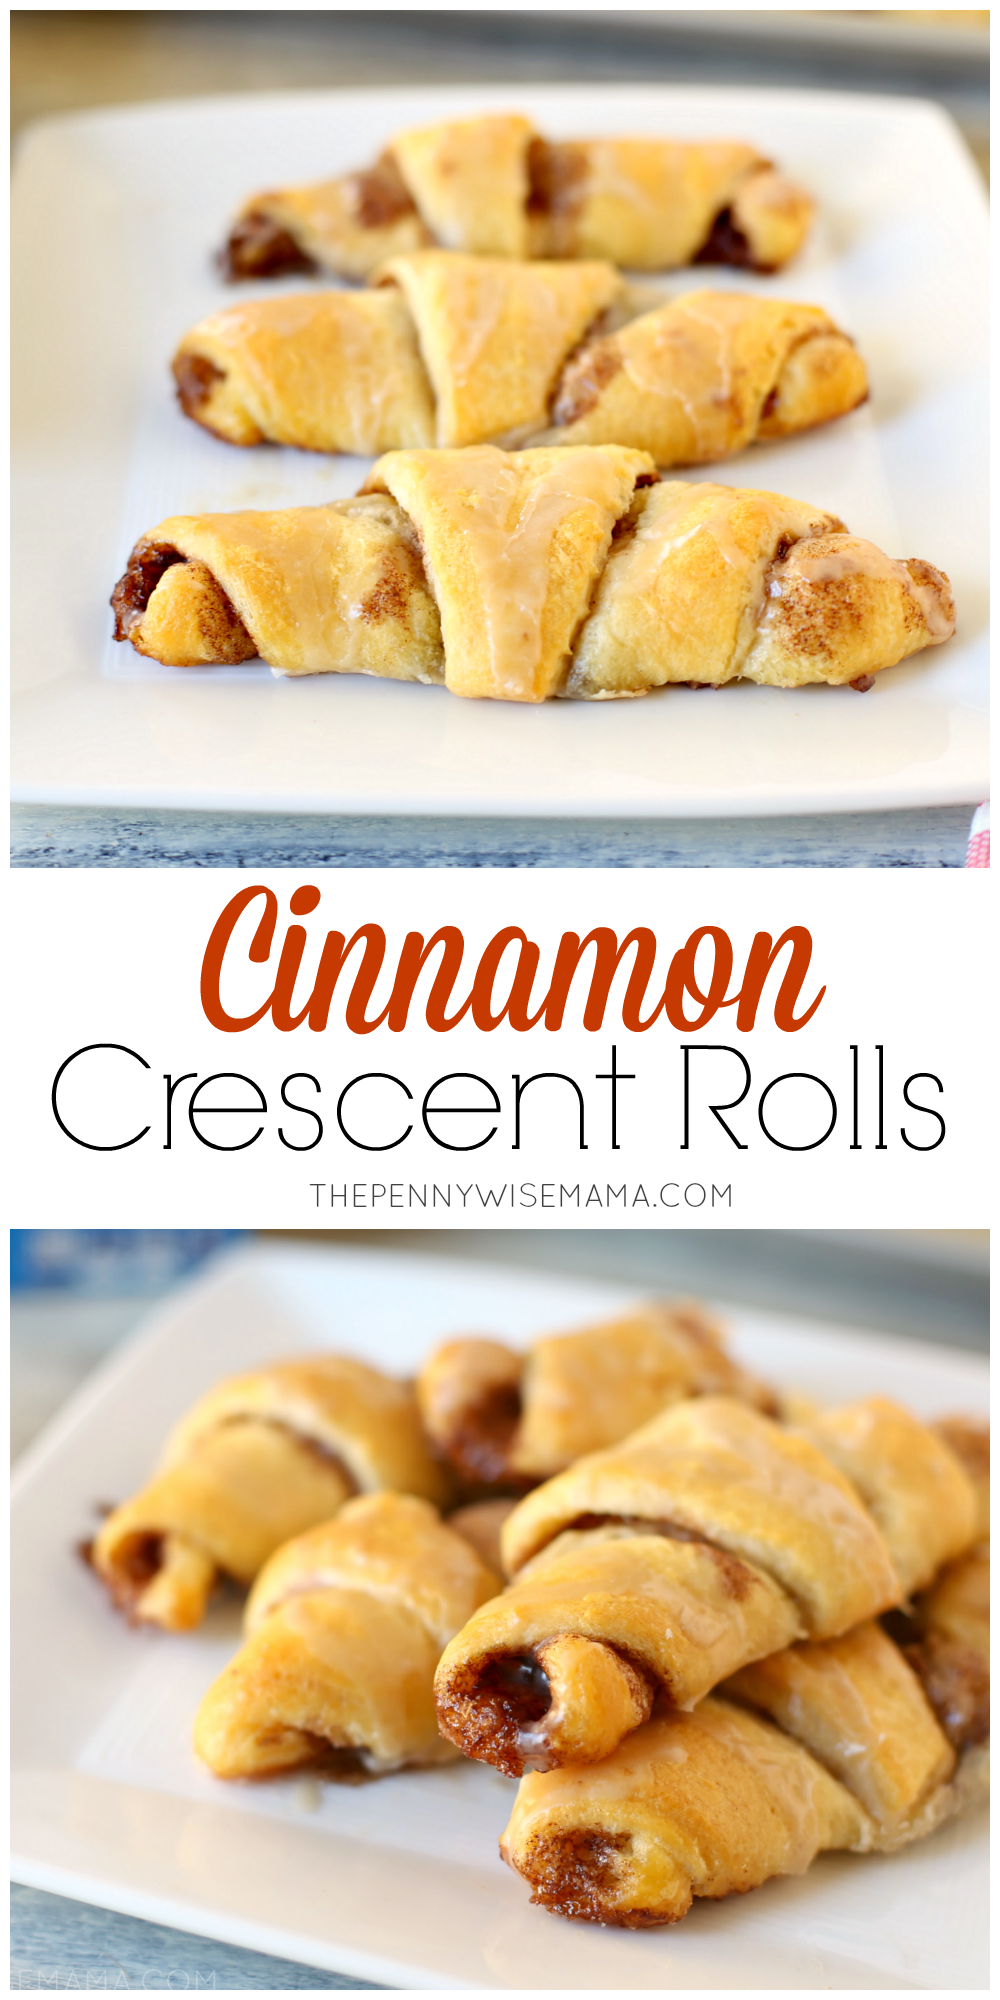 Cinnamon Crescent Rolls - a delicious & simple recipe that only takes 15 mins to prepare!